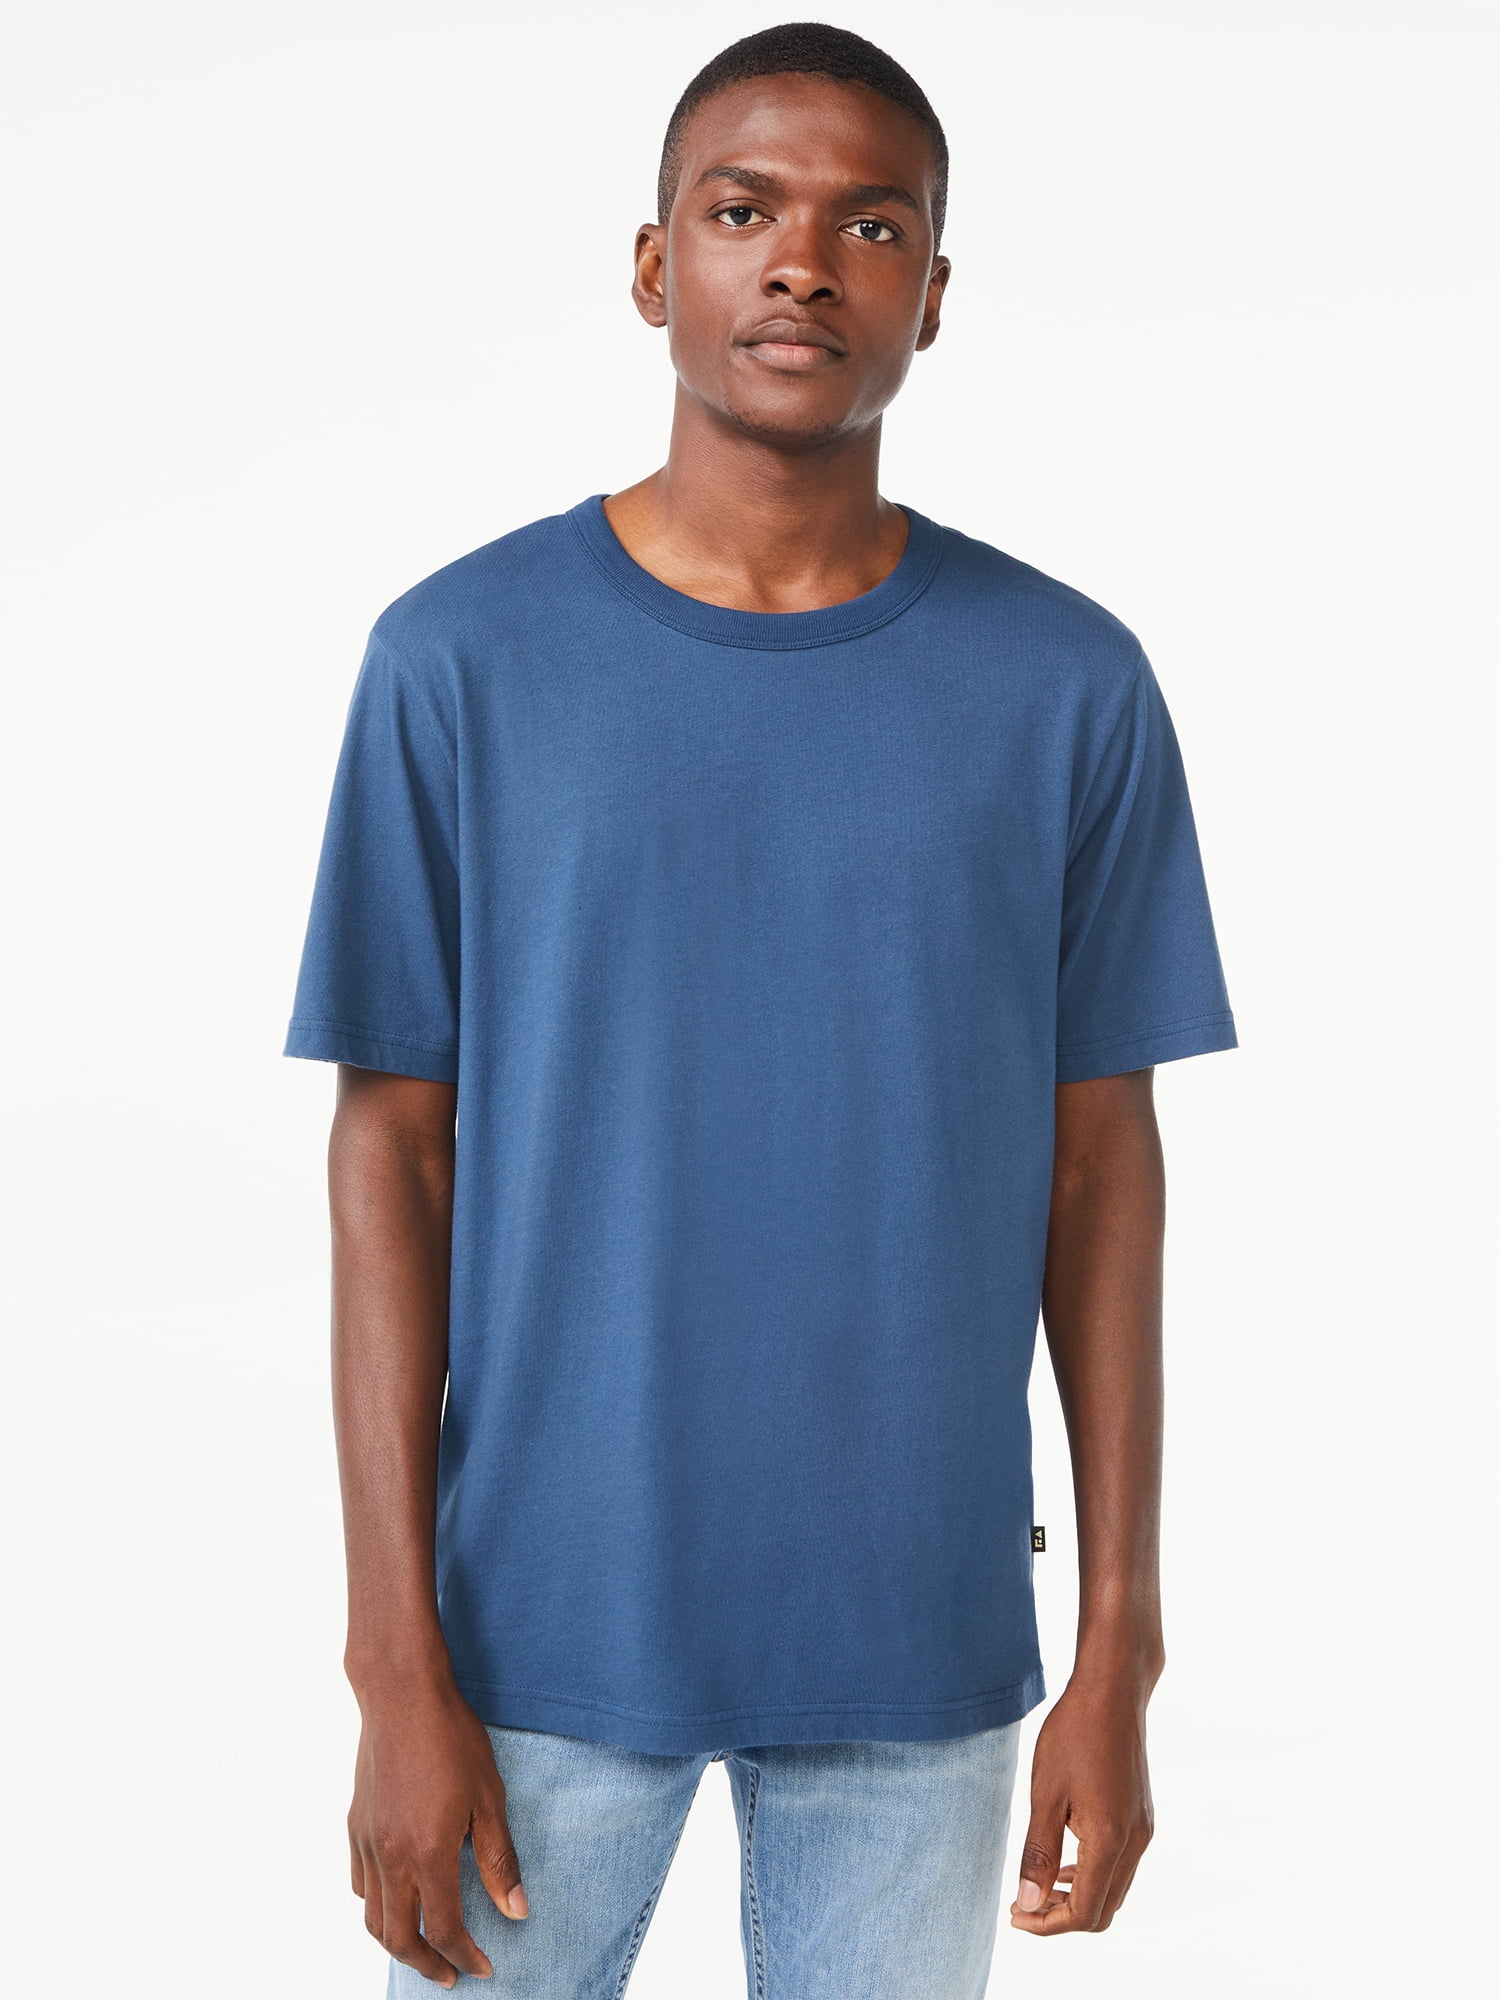 Free Assembly Men's Everyday Tee with Short Sleeves, Sizes XS-3XL ...